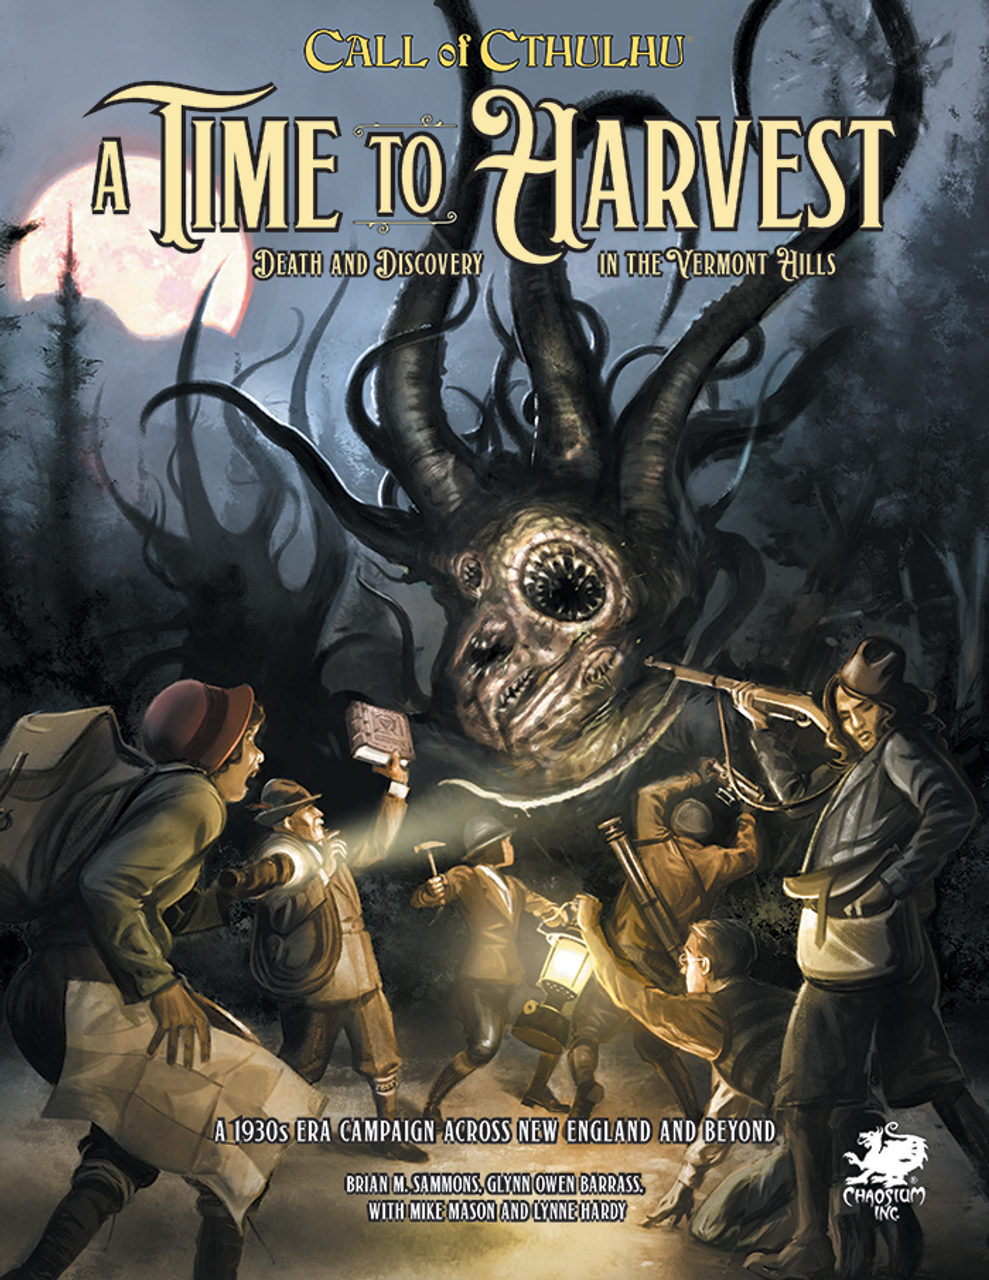 Call of Cthulhu - A Time to Harvest, A 1930s Era Campaign Across New England and Beyond